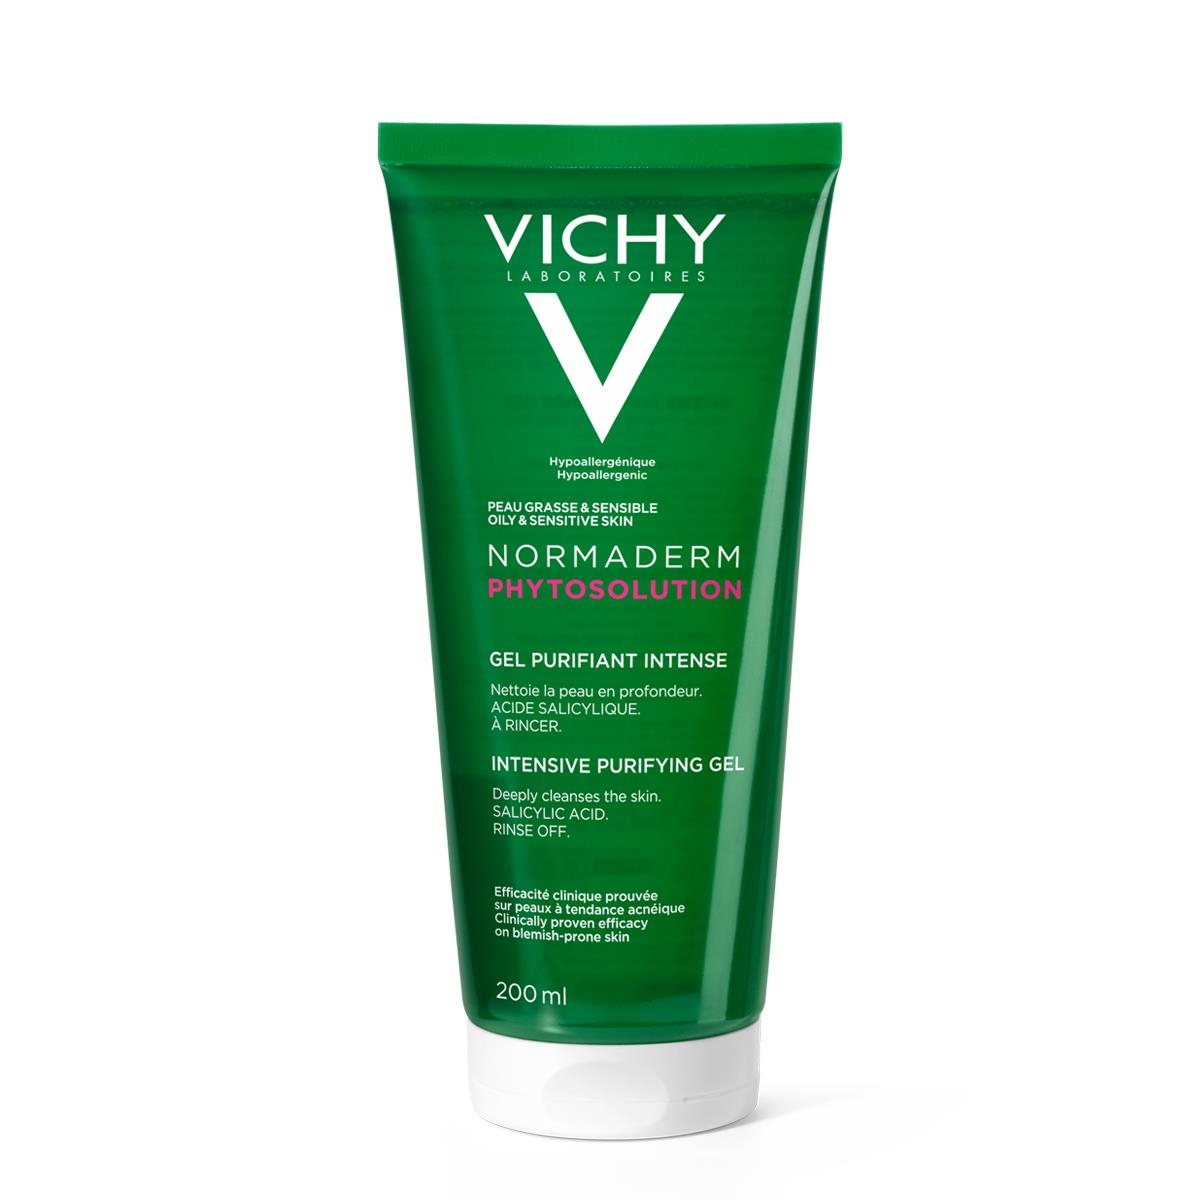 Vichy Normaderm Phytosolution 200 мл Очищающий гель vichy очищающий лосьон normaderm 200 мл